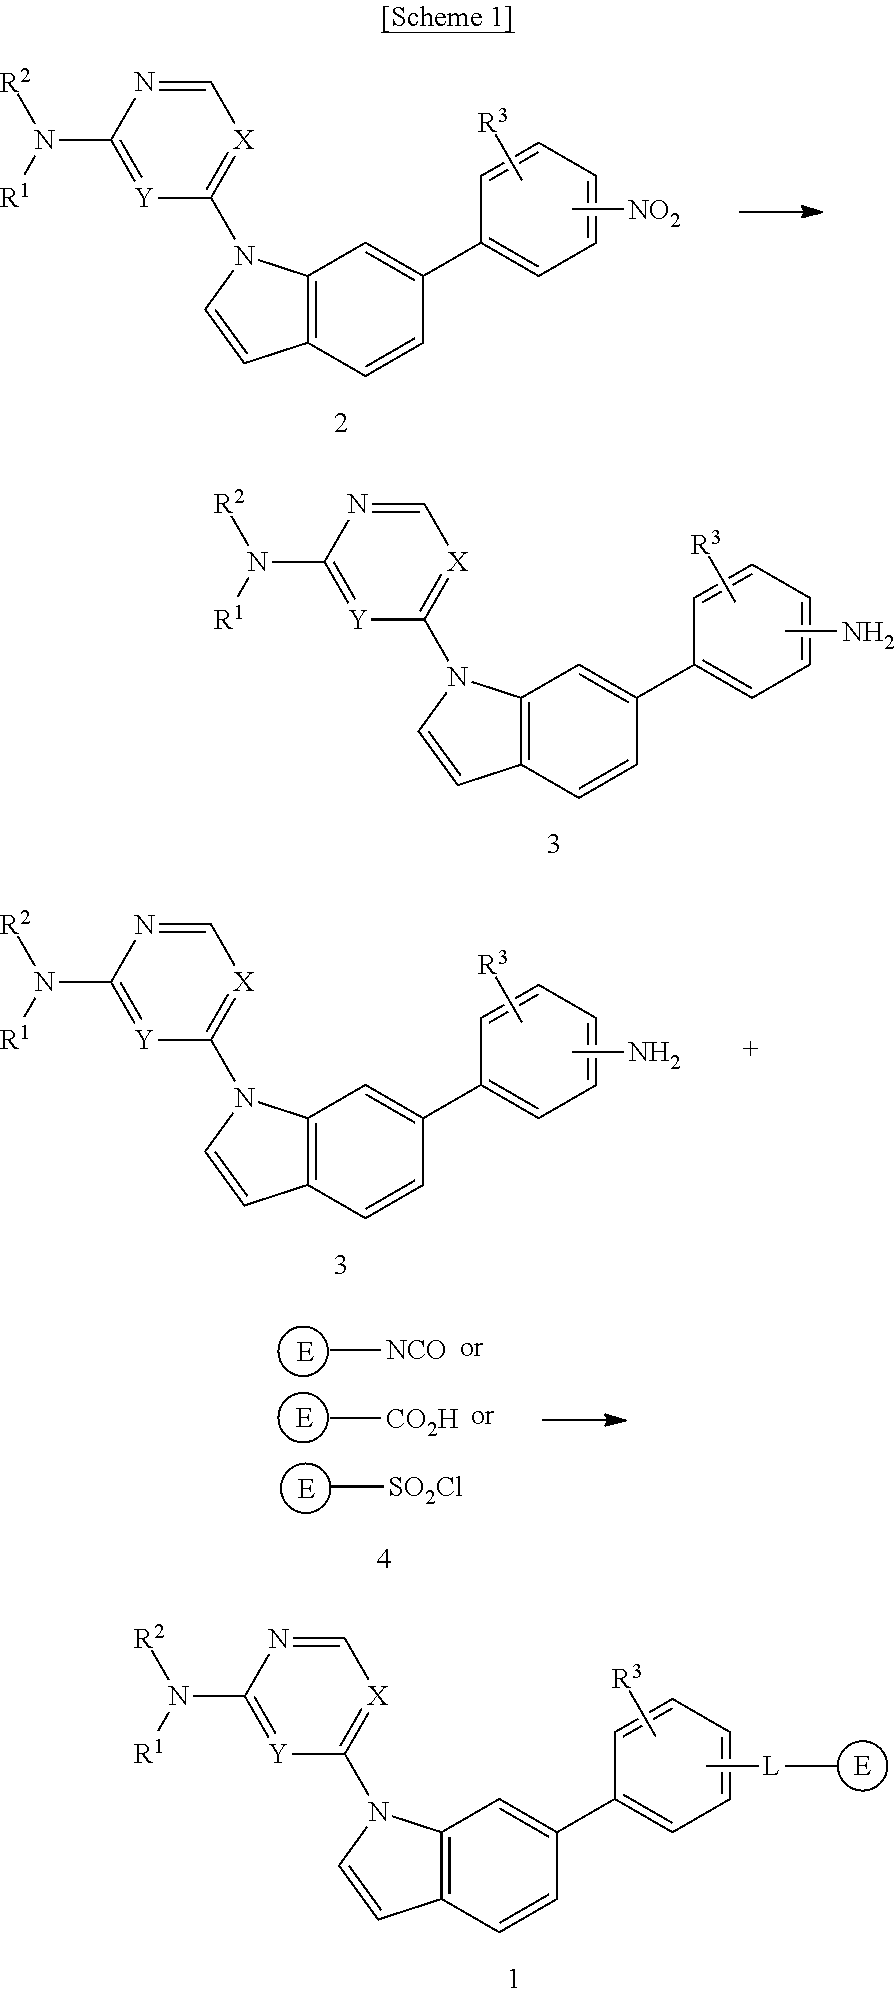 1,6-disubstituted indole compounds as protein kinase inhibitors